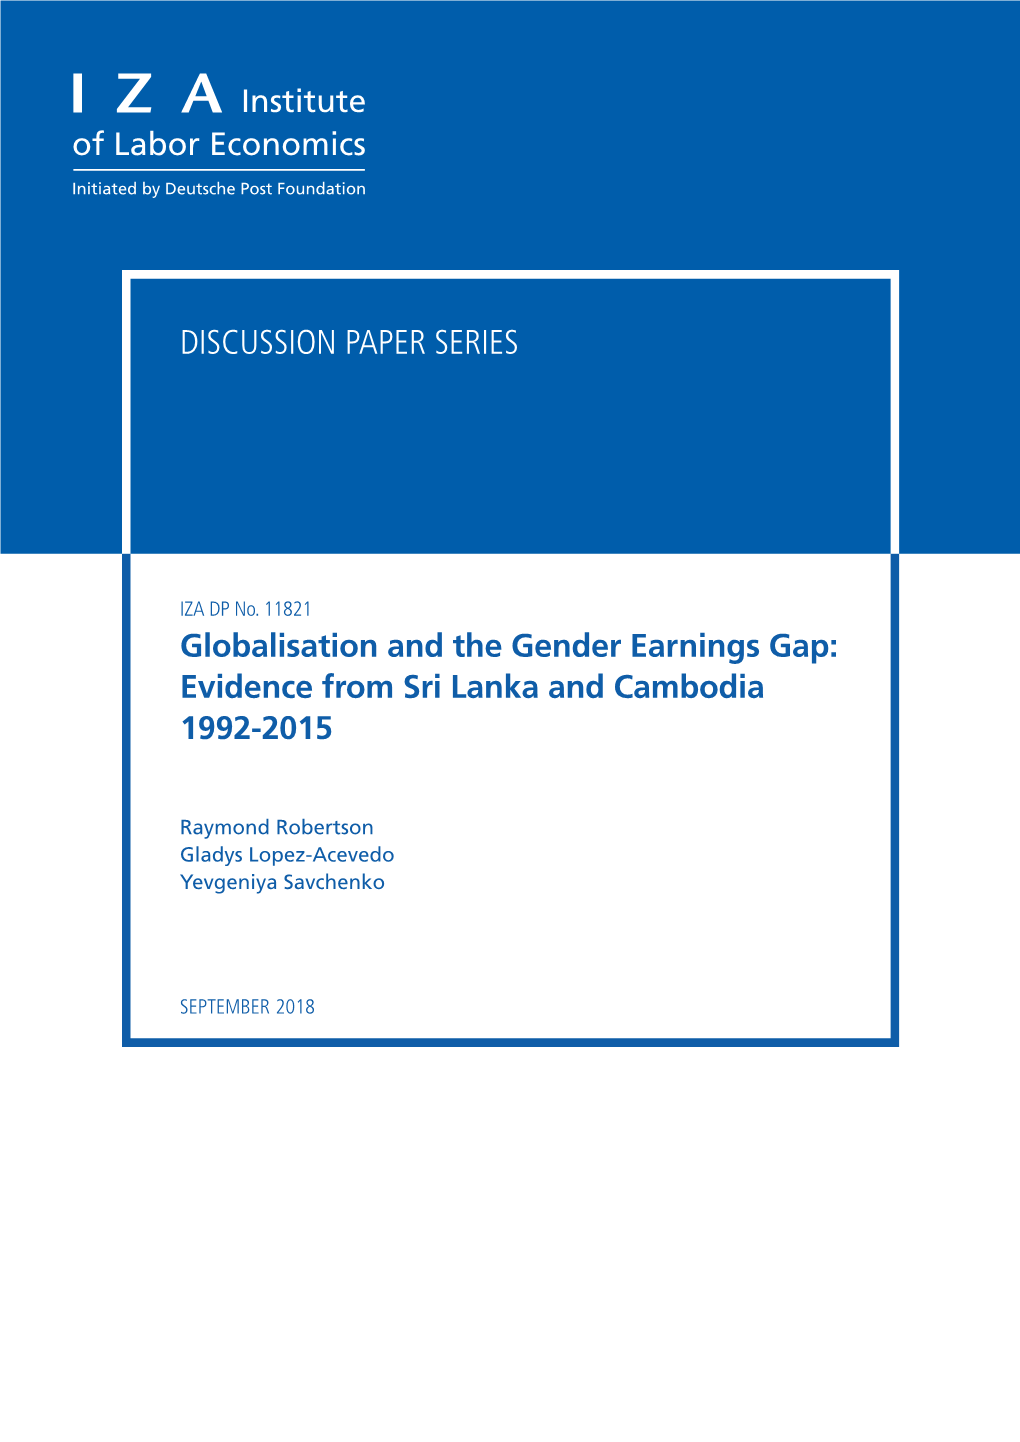 Globalisation and the Gender Earnings Gap: Evidence from Sri Lanka and Cambodia 1992-2015